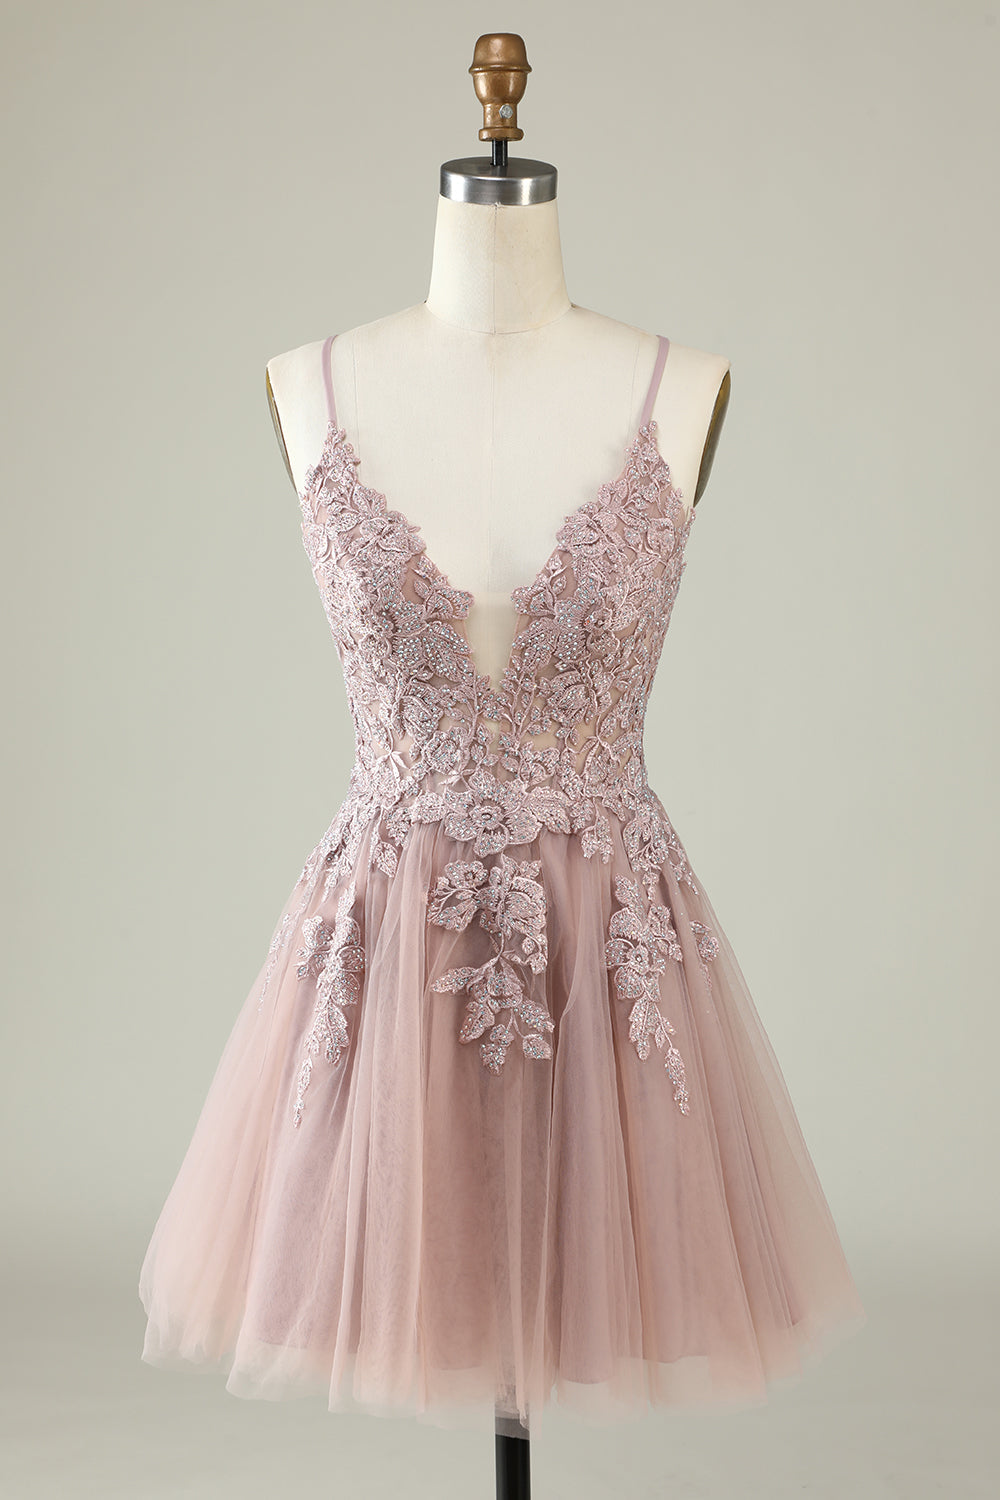 Lace-Up Blush Pink Appliques Short Homecoming Dress